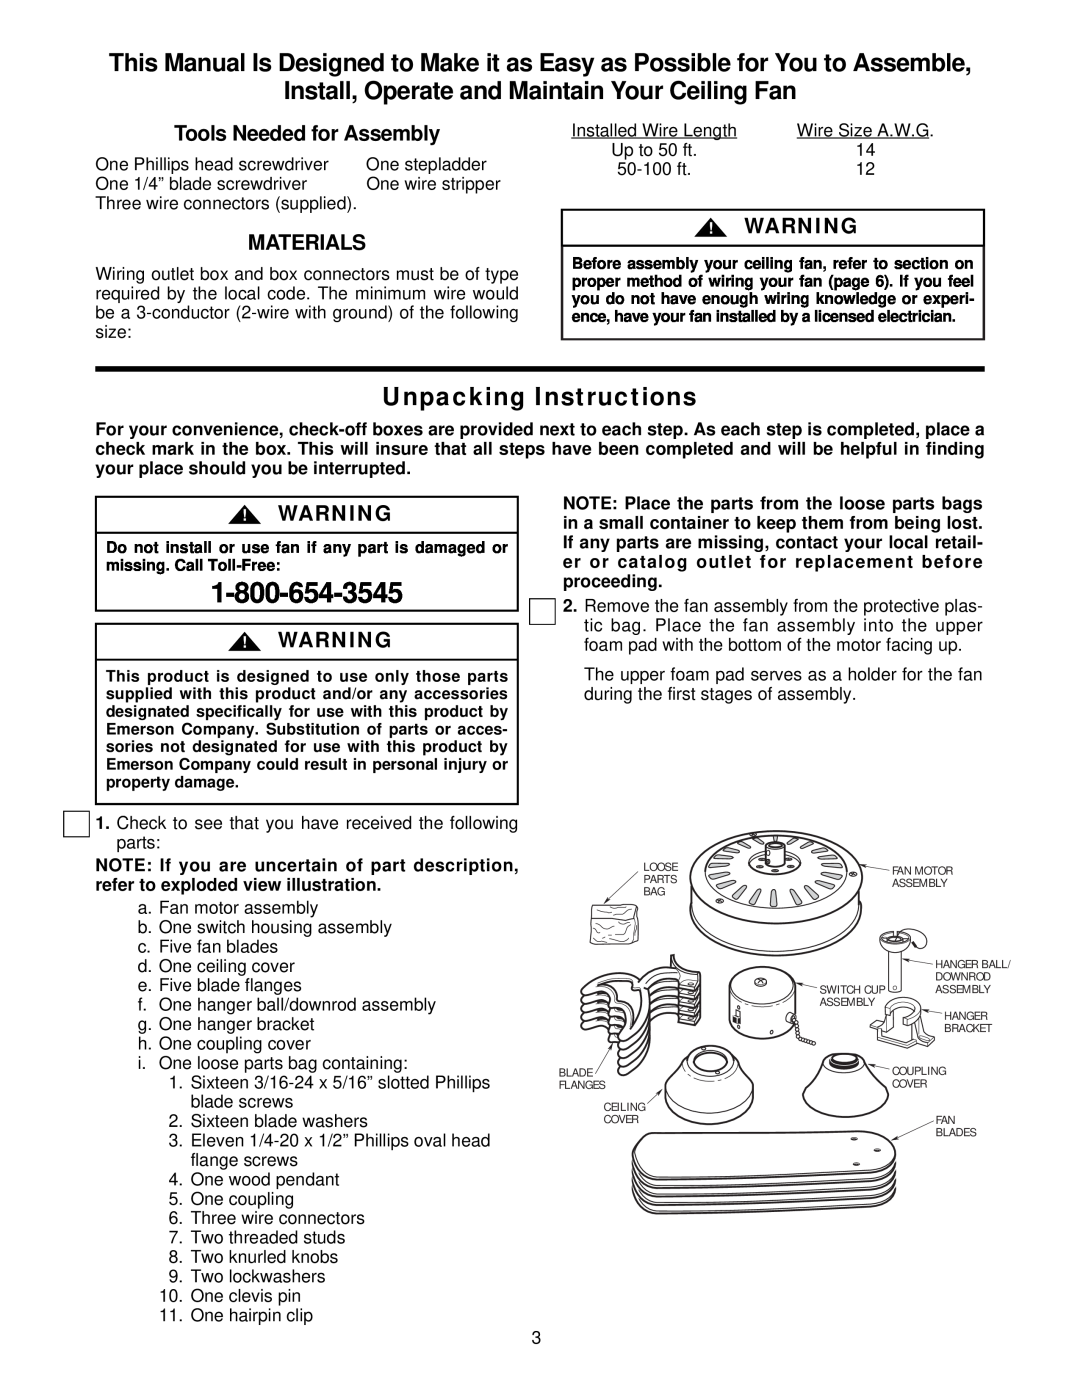 Emerson CF755S04 warranty Install, Operate and Maintain Your Ceiling Fan, Unpacking Instructions, Tools Needed for Assembly 